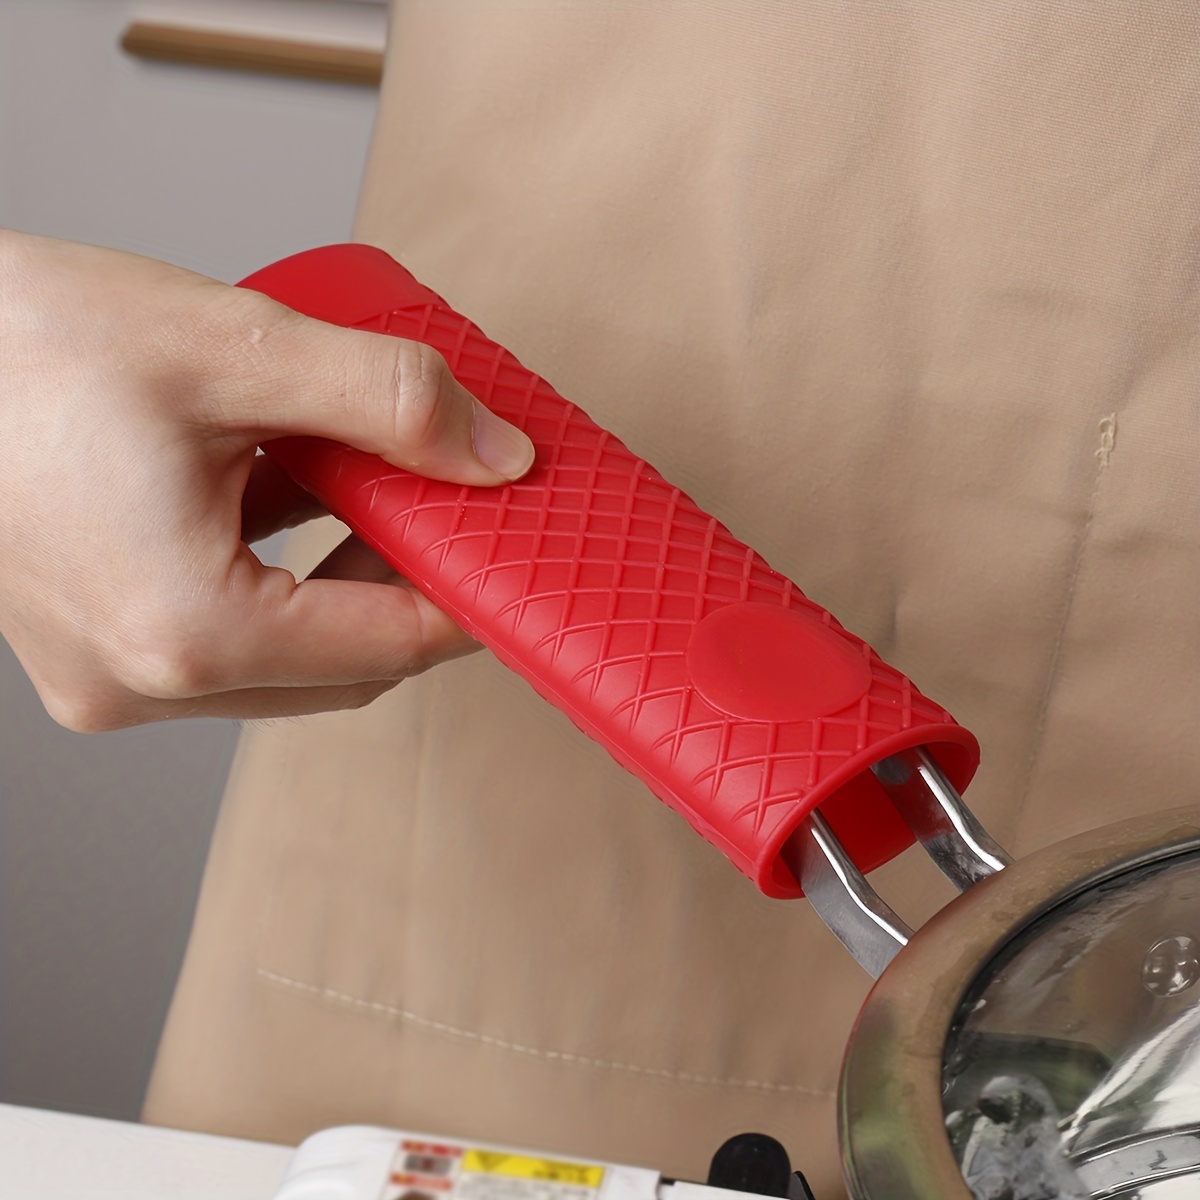 Silicone Heat Resistant Handle Cover